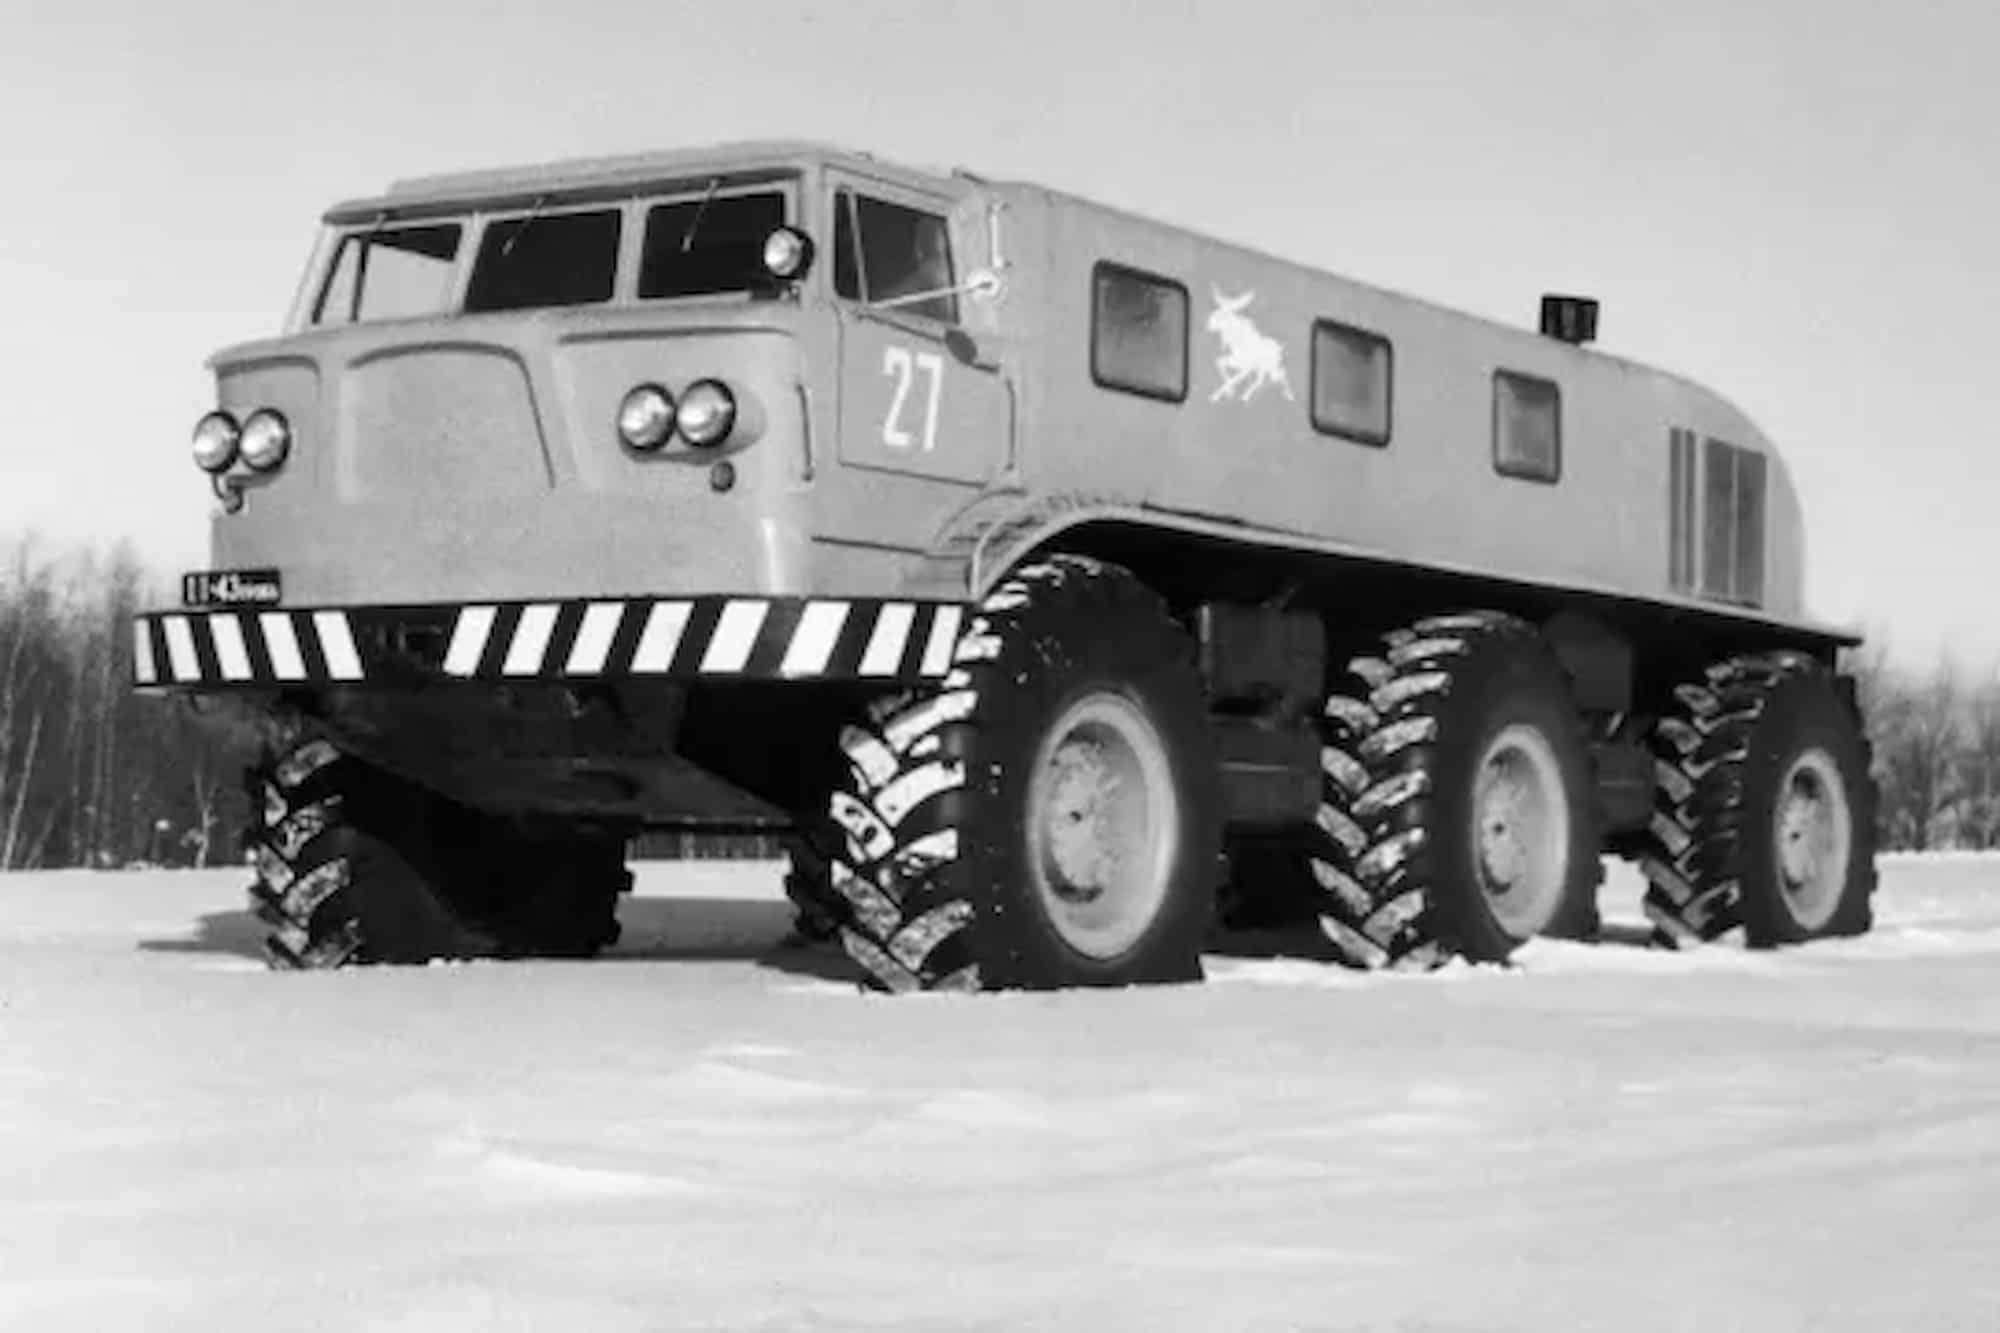 the father of all 6x6s is this 60s soviet doomsday snowmobile developed in two months thumbnail 3.jpg